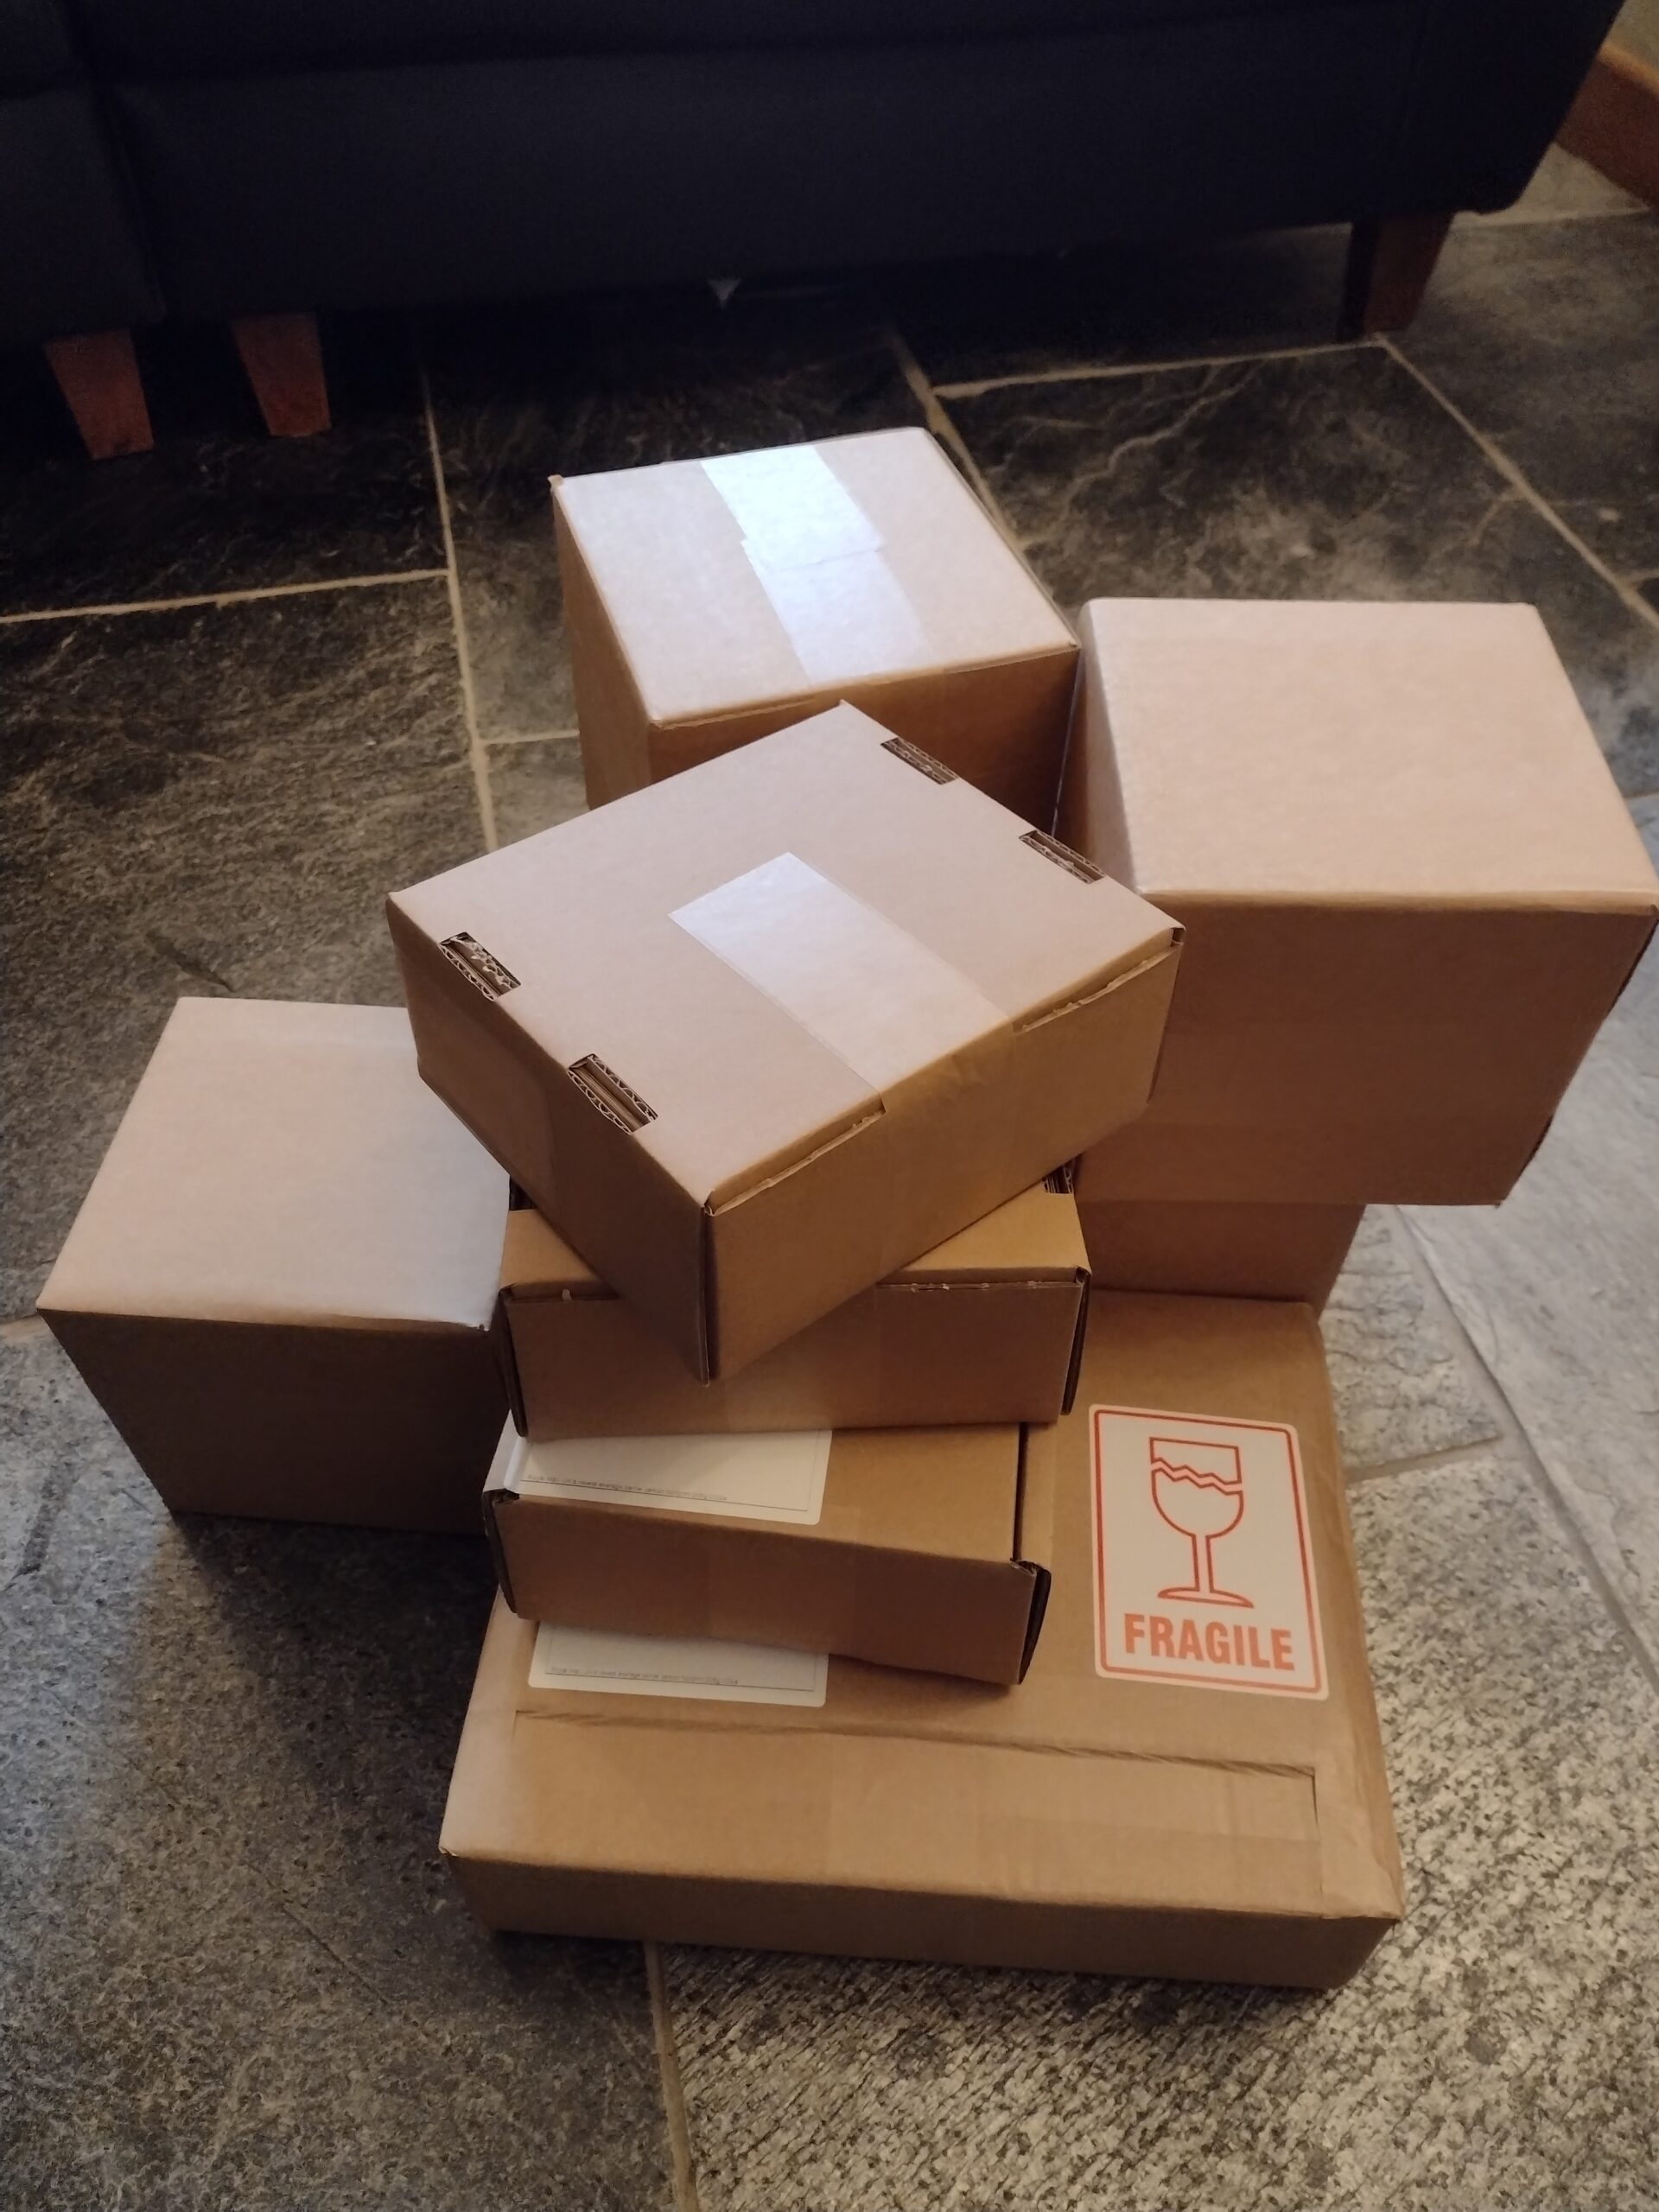 A stack of brown cardboard cartons, packed and ready to post.